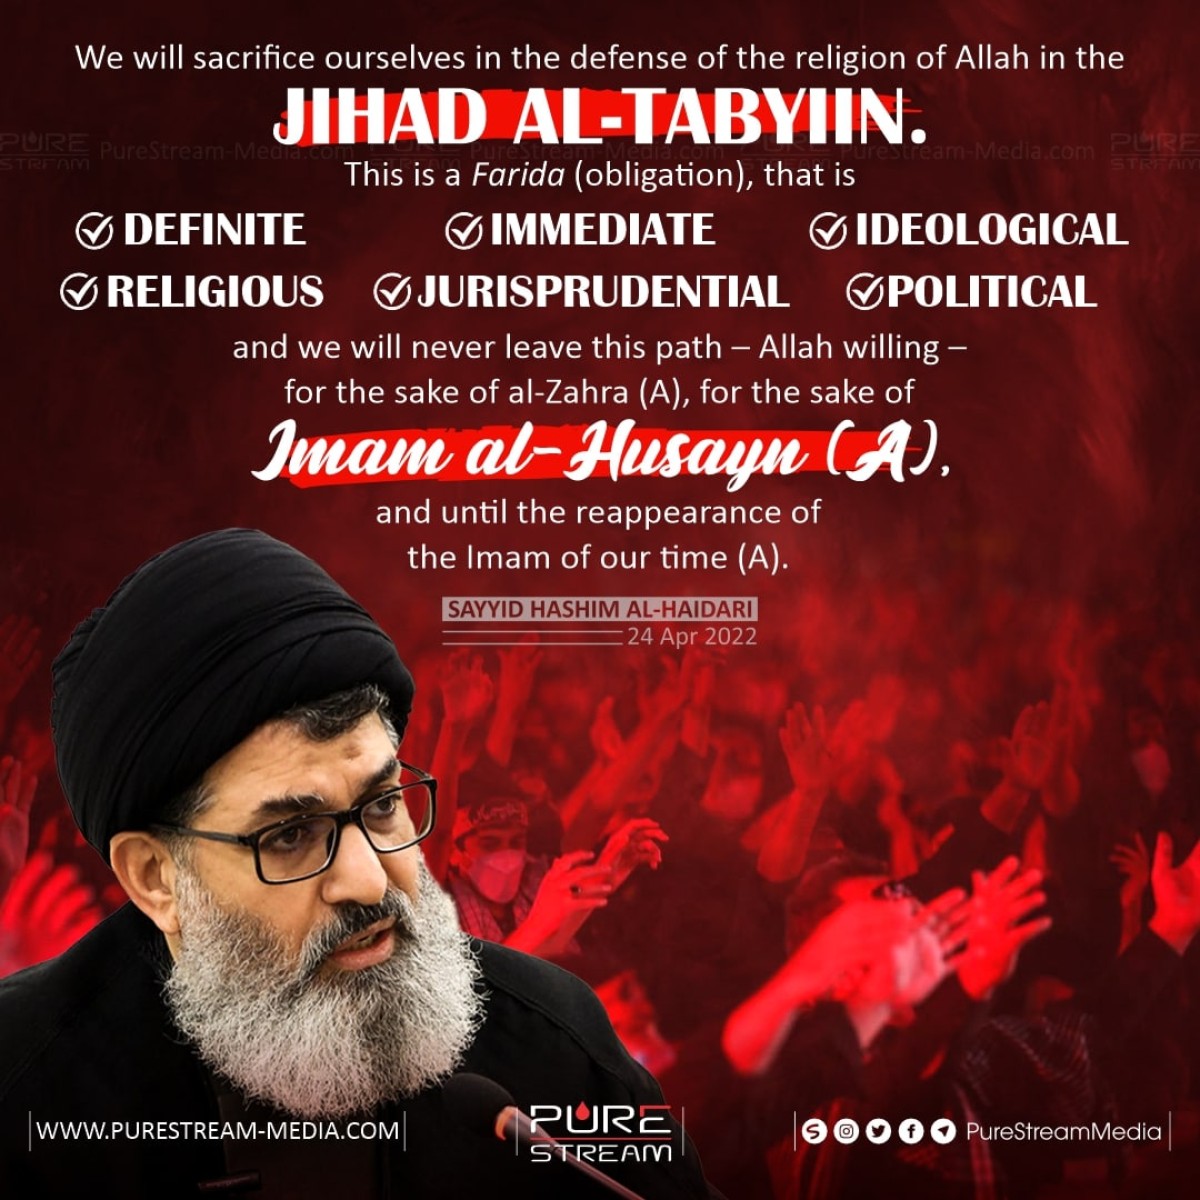 We will sacrifice ourselves in the defense of the religion of Allah in the Jihad al-Tabyiin